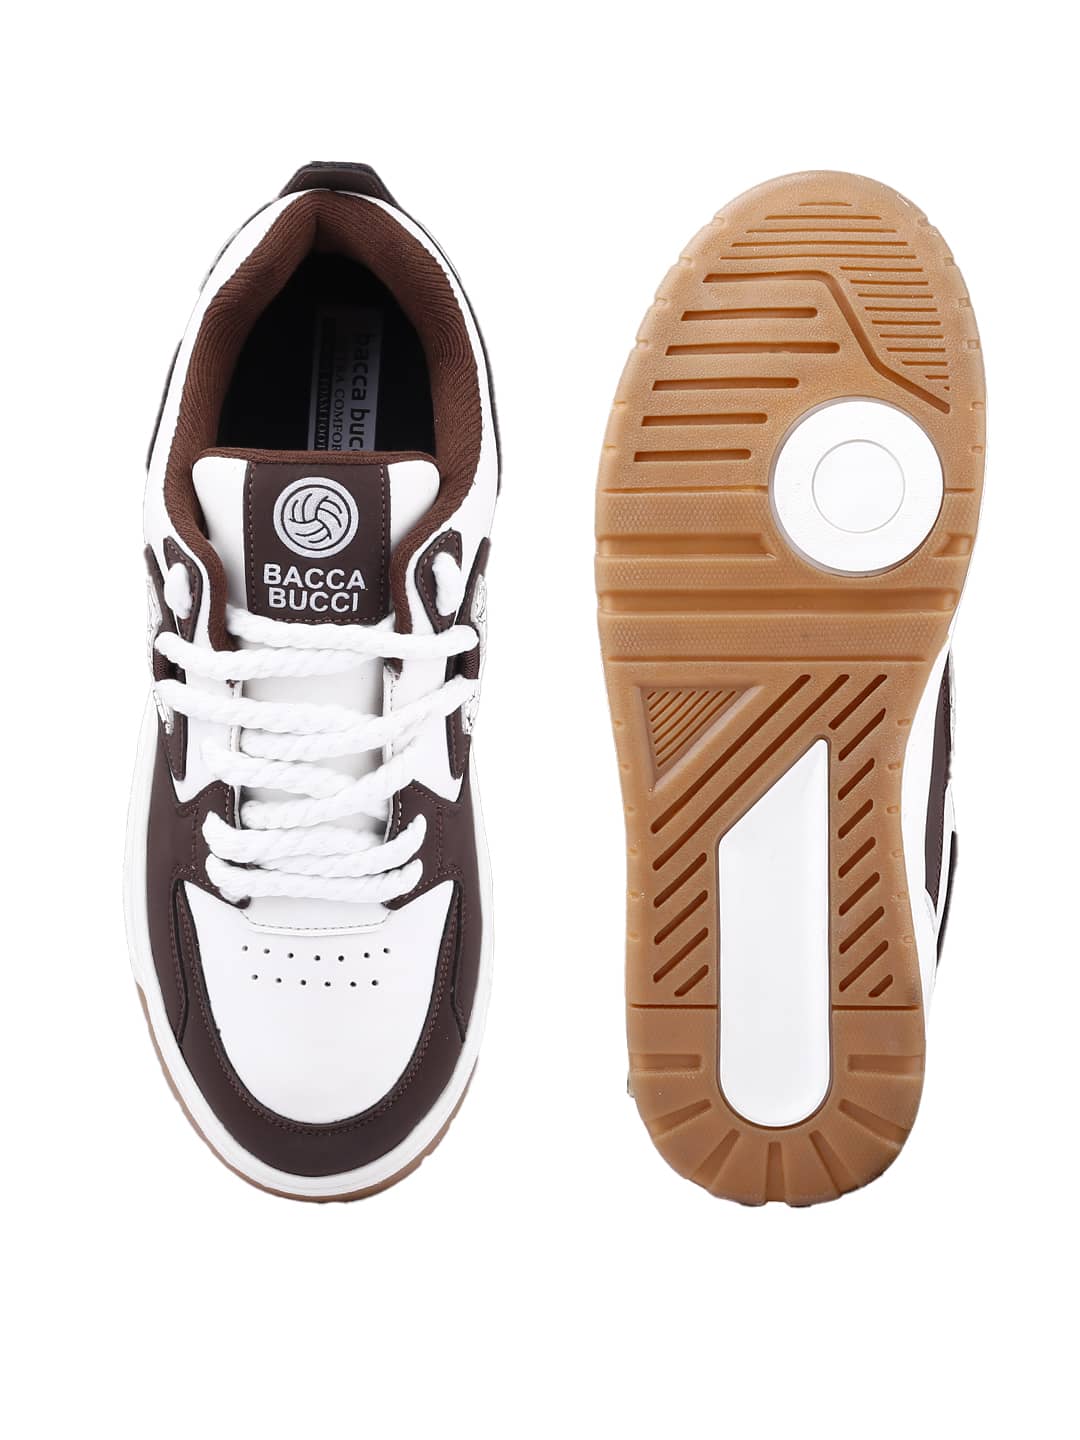 Bacca Bucci Stride Eclipse: Low-Top Flat-Sole Sneakers with Signature Thick Round Laces